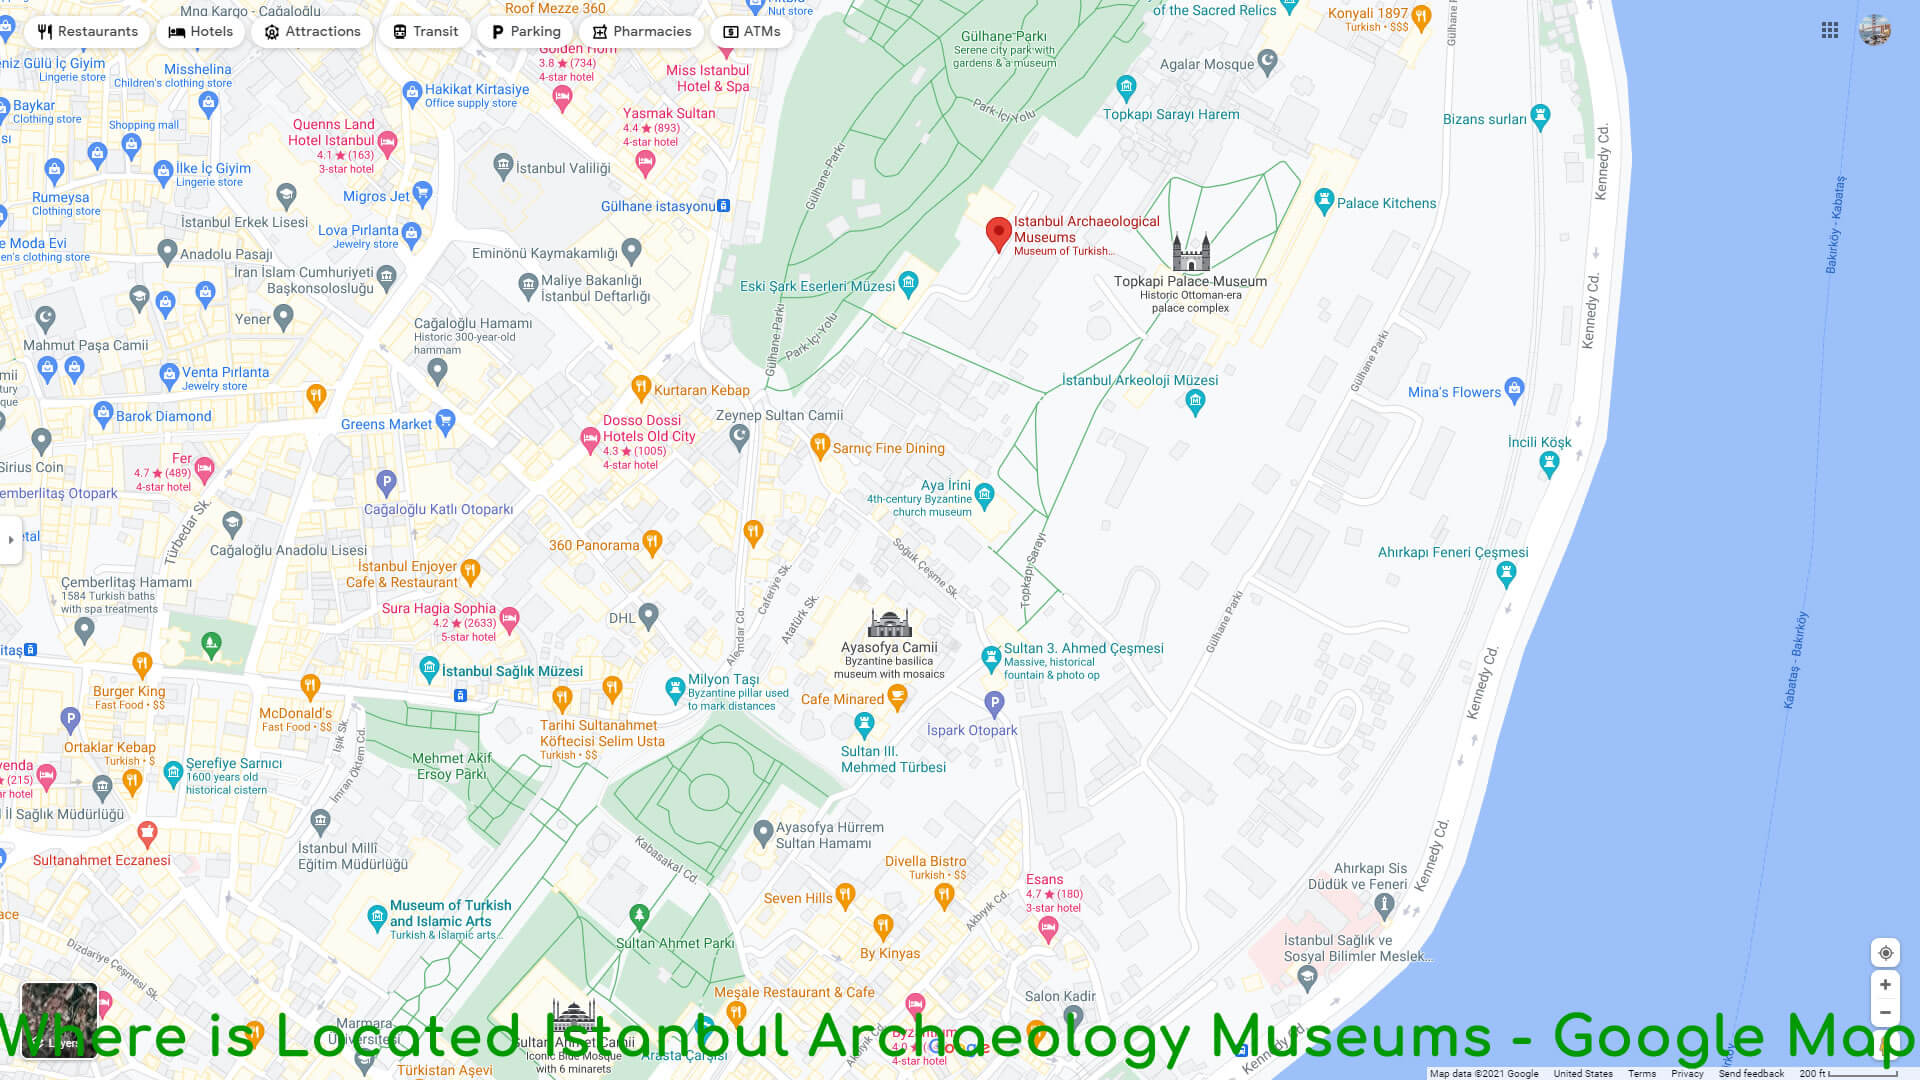 Where is Located Istanbul Archaeology Museums - Google Map